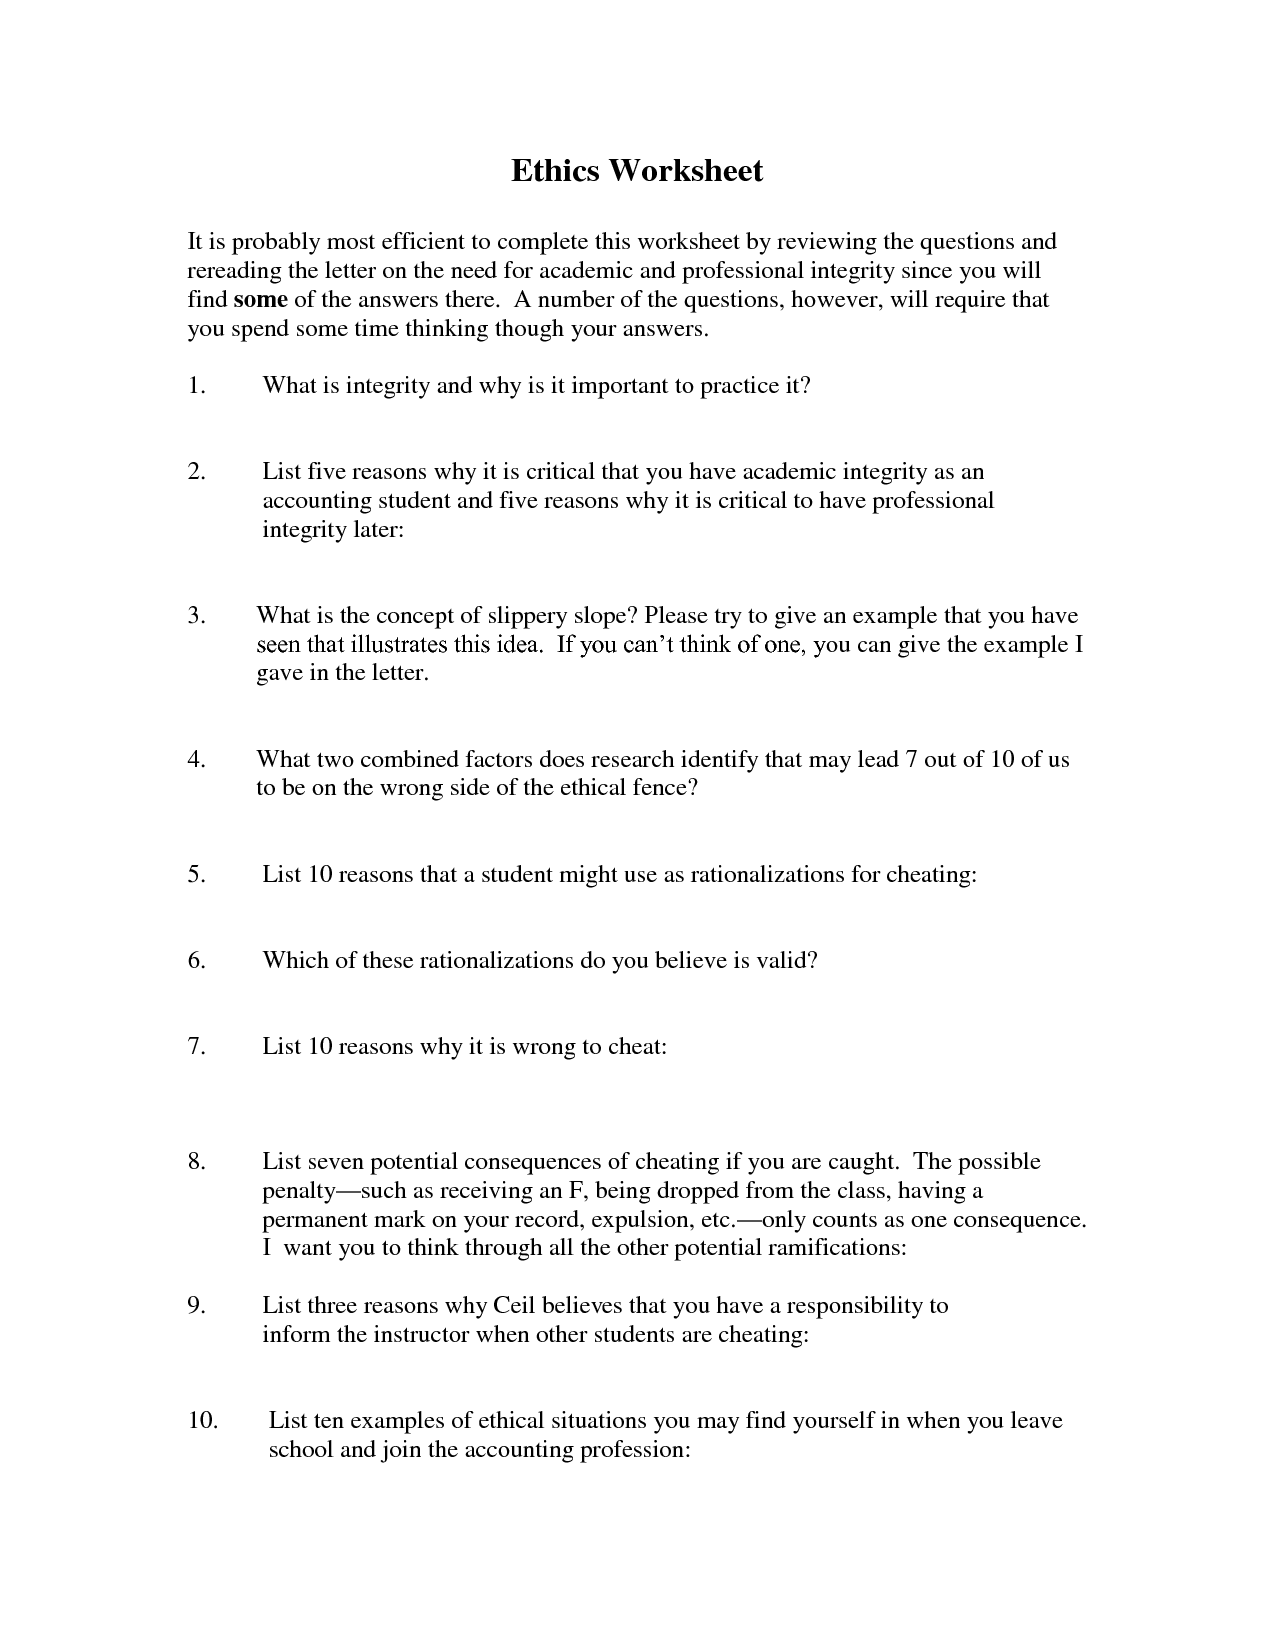 Integrity Questions and Answers Worksheet Image